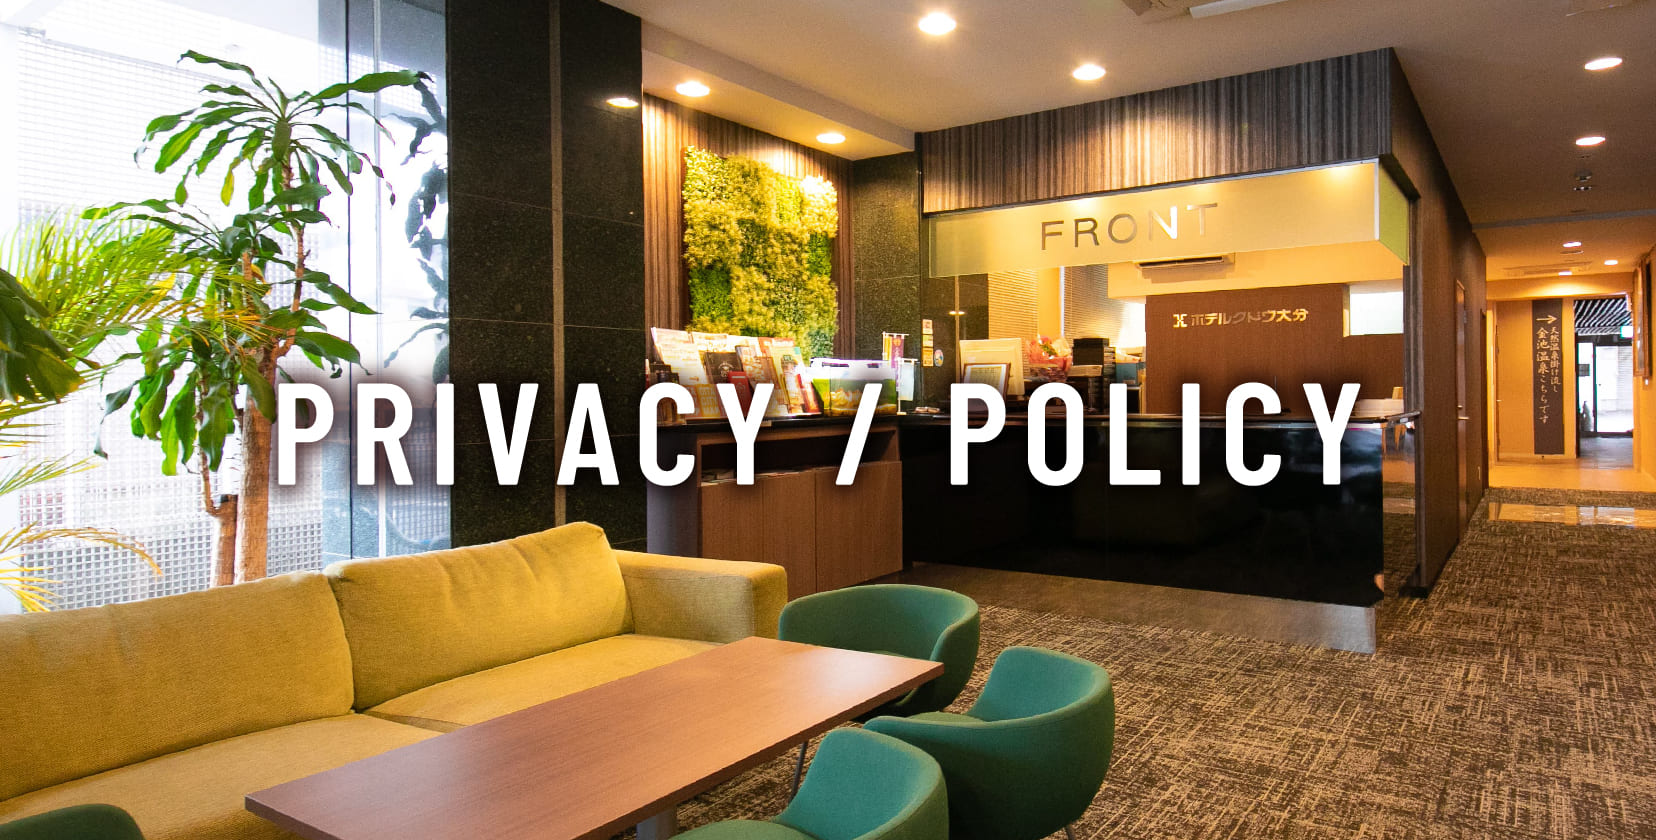 PRIVACY / POLICY